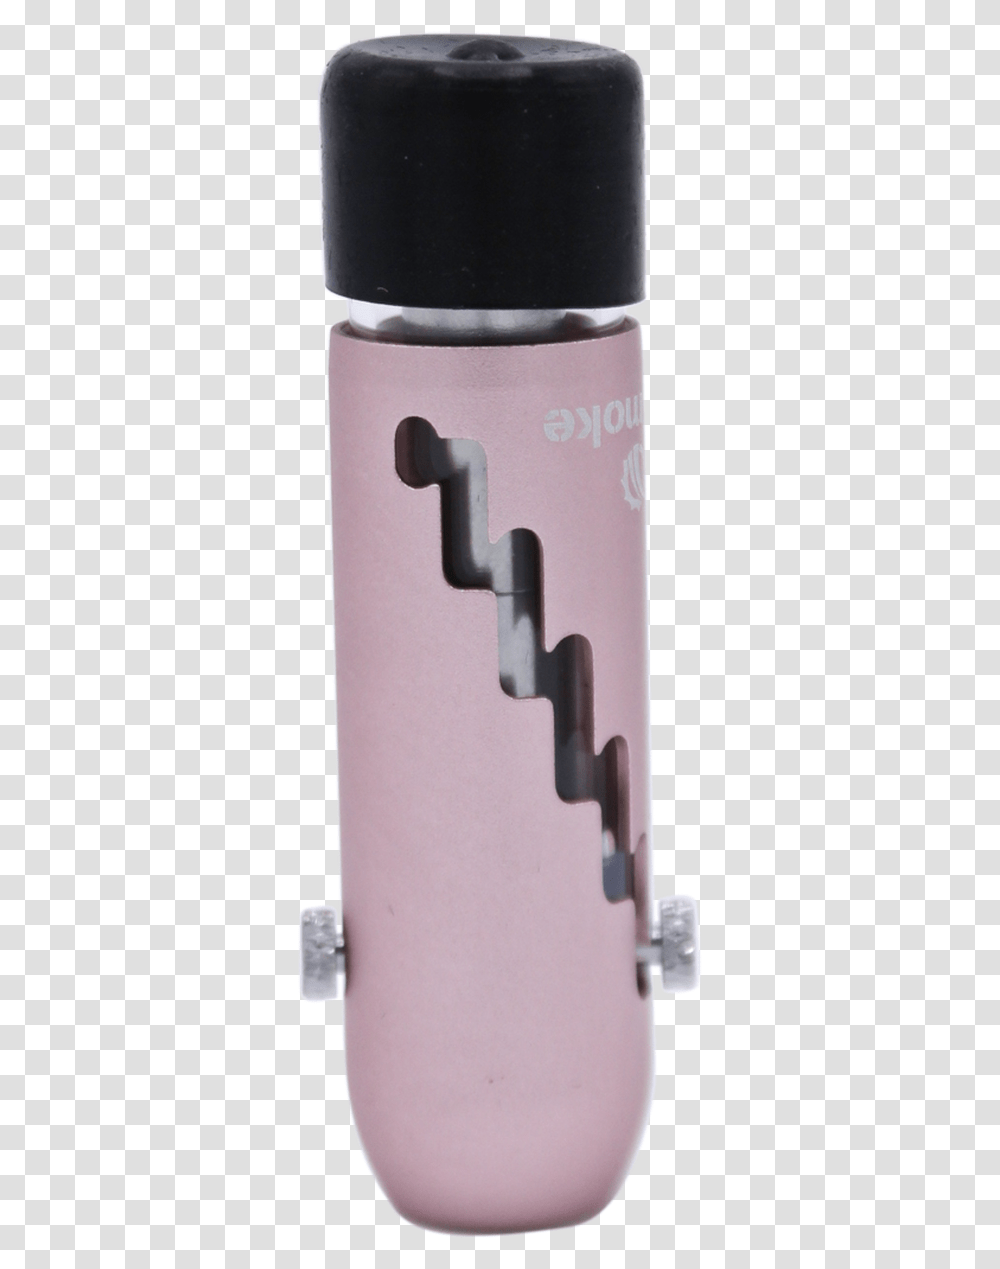 Eject Blunt Bottle, Weapon, Weaponry, Blade Transparent Png